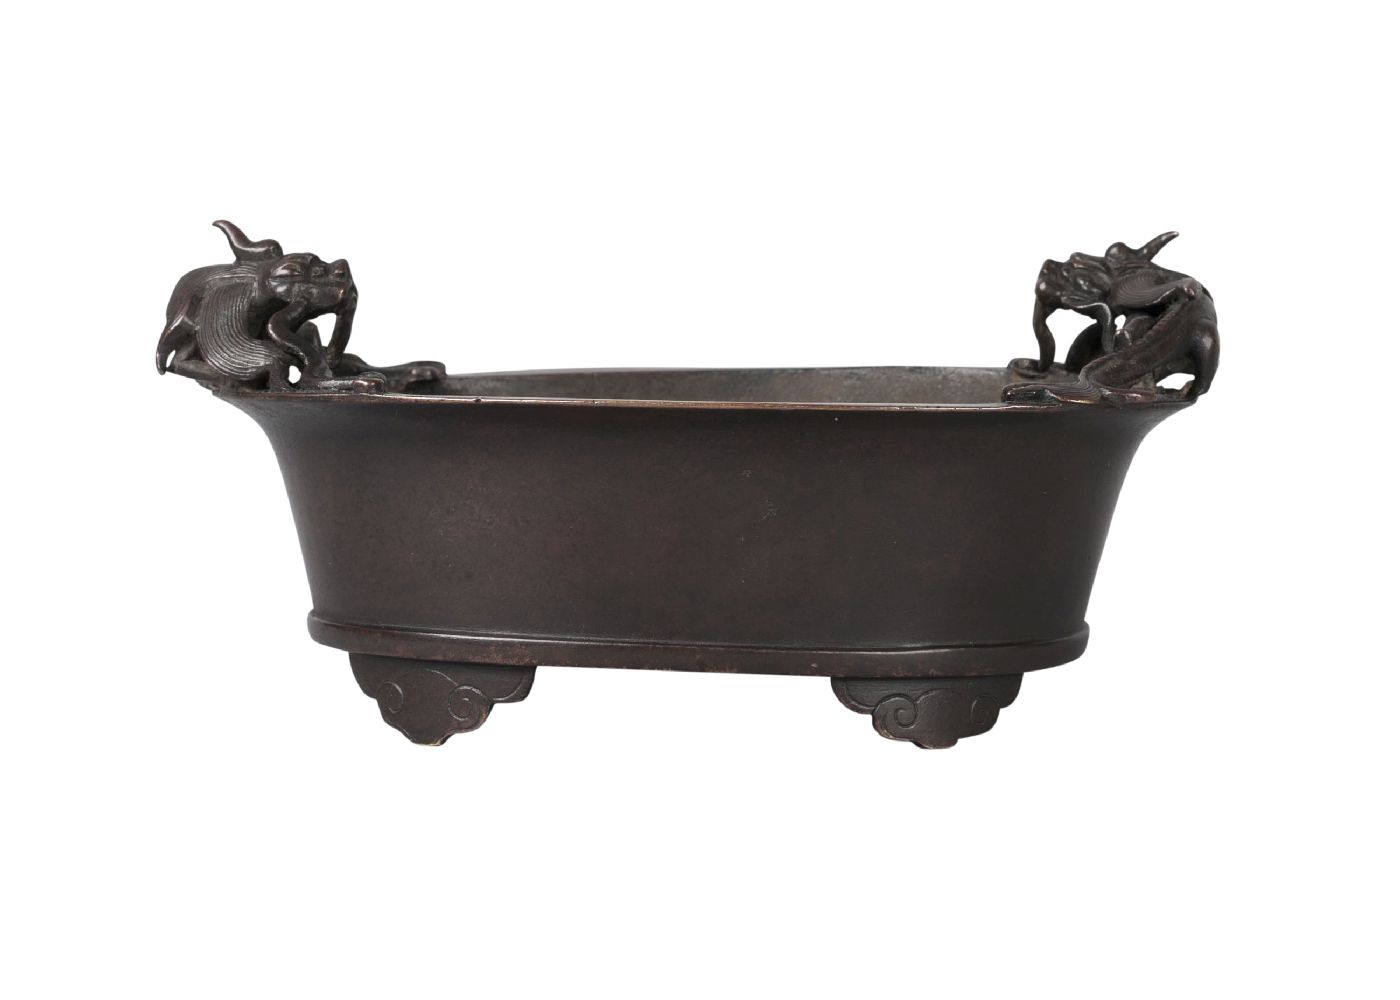 A Chinese bronze oval censer, Ming dynasty, 16th/17th century, with two finely cast handles modelled